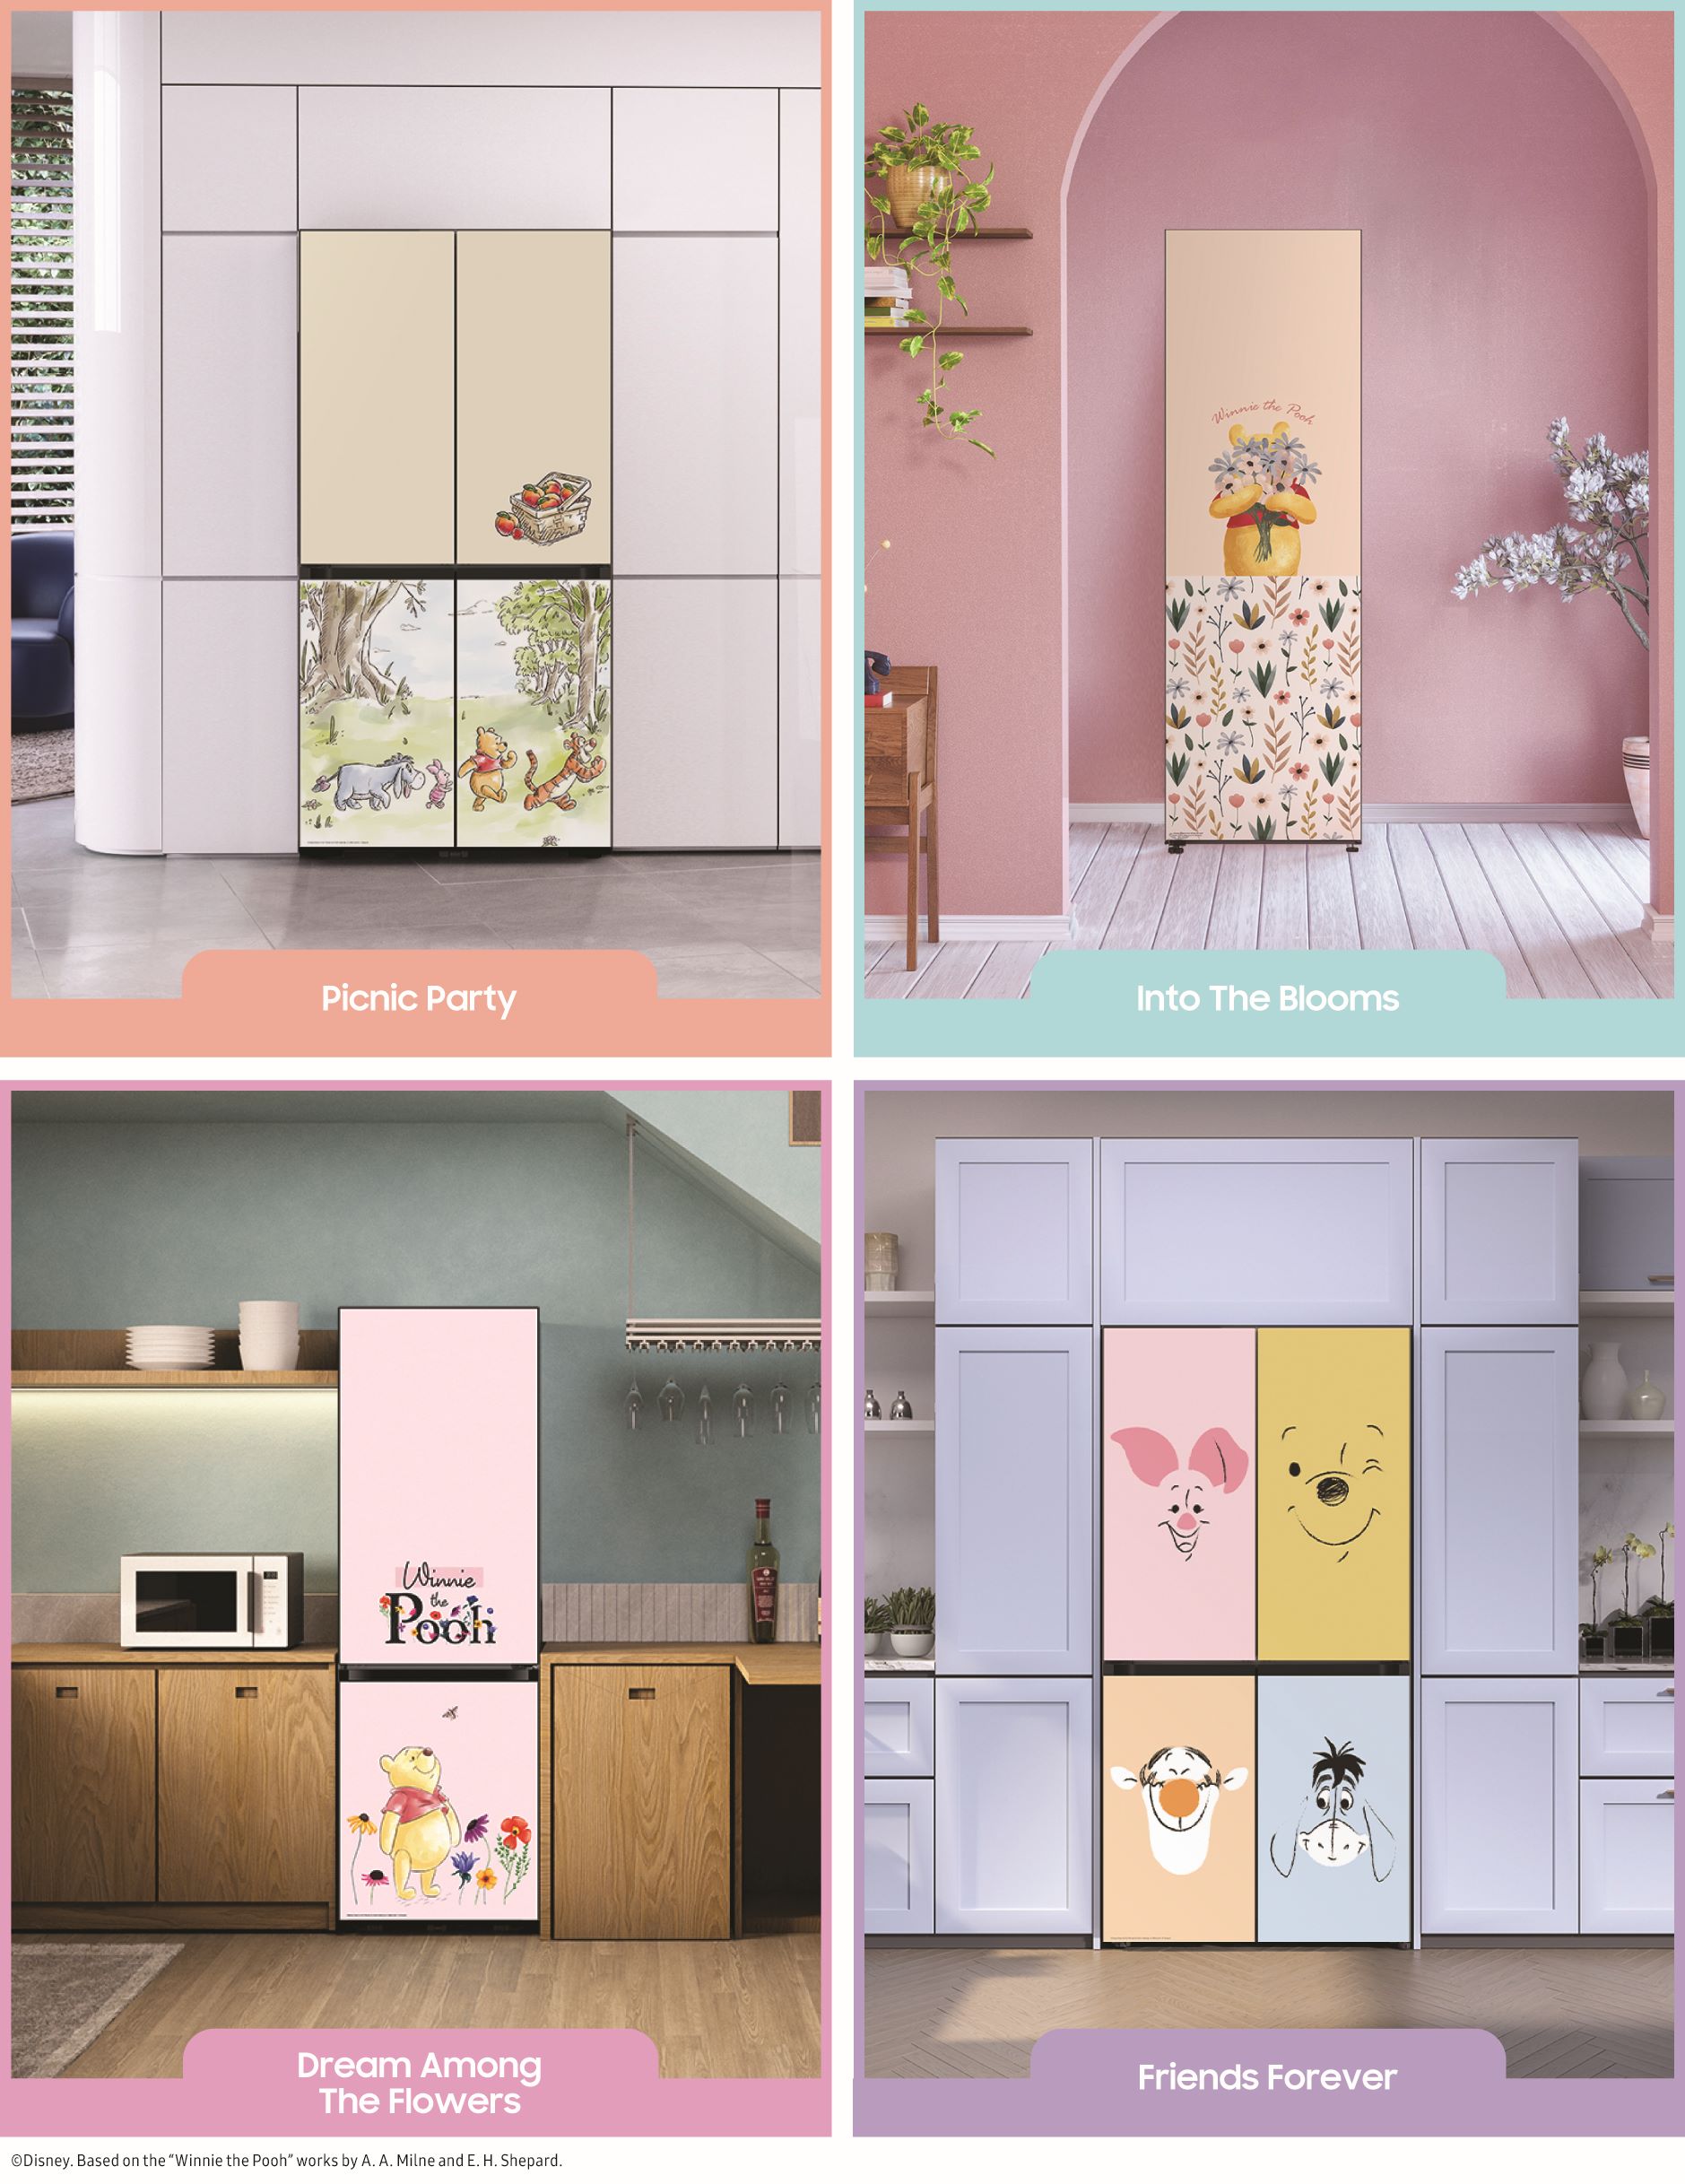 From a minimalist home to a vibrant kitchen, Samsung Bespoke Winnie the Pooh Collection brightens homes of many styles